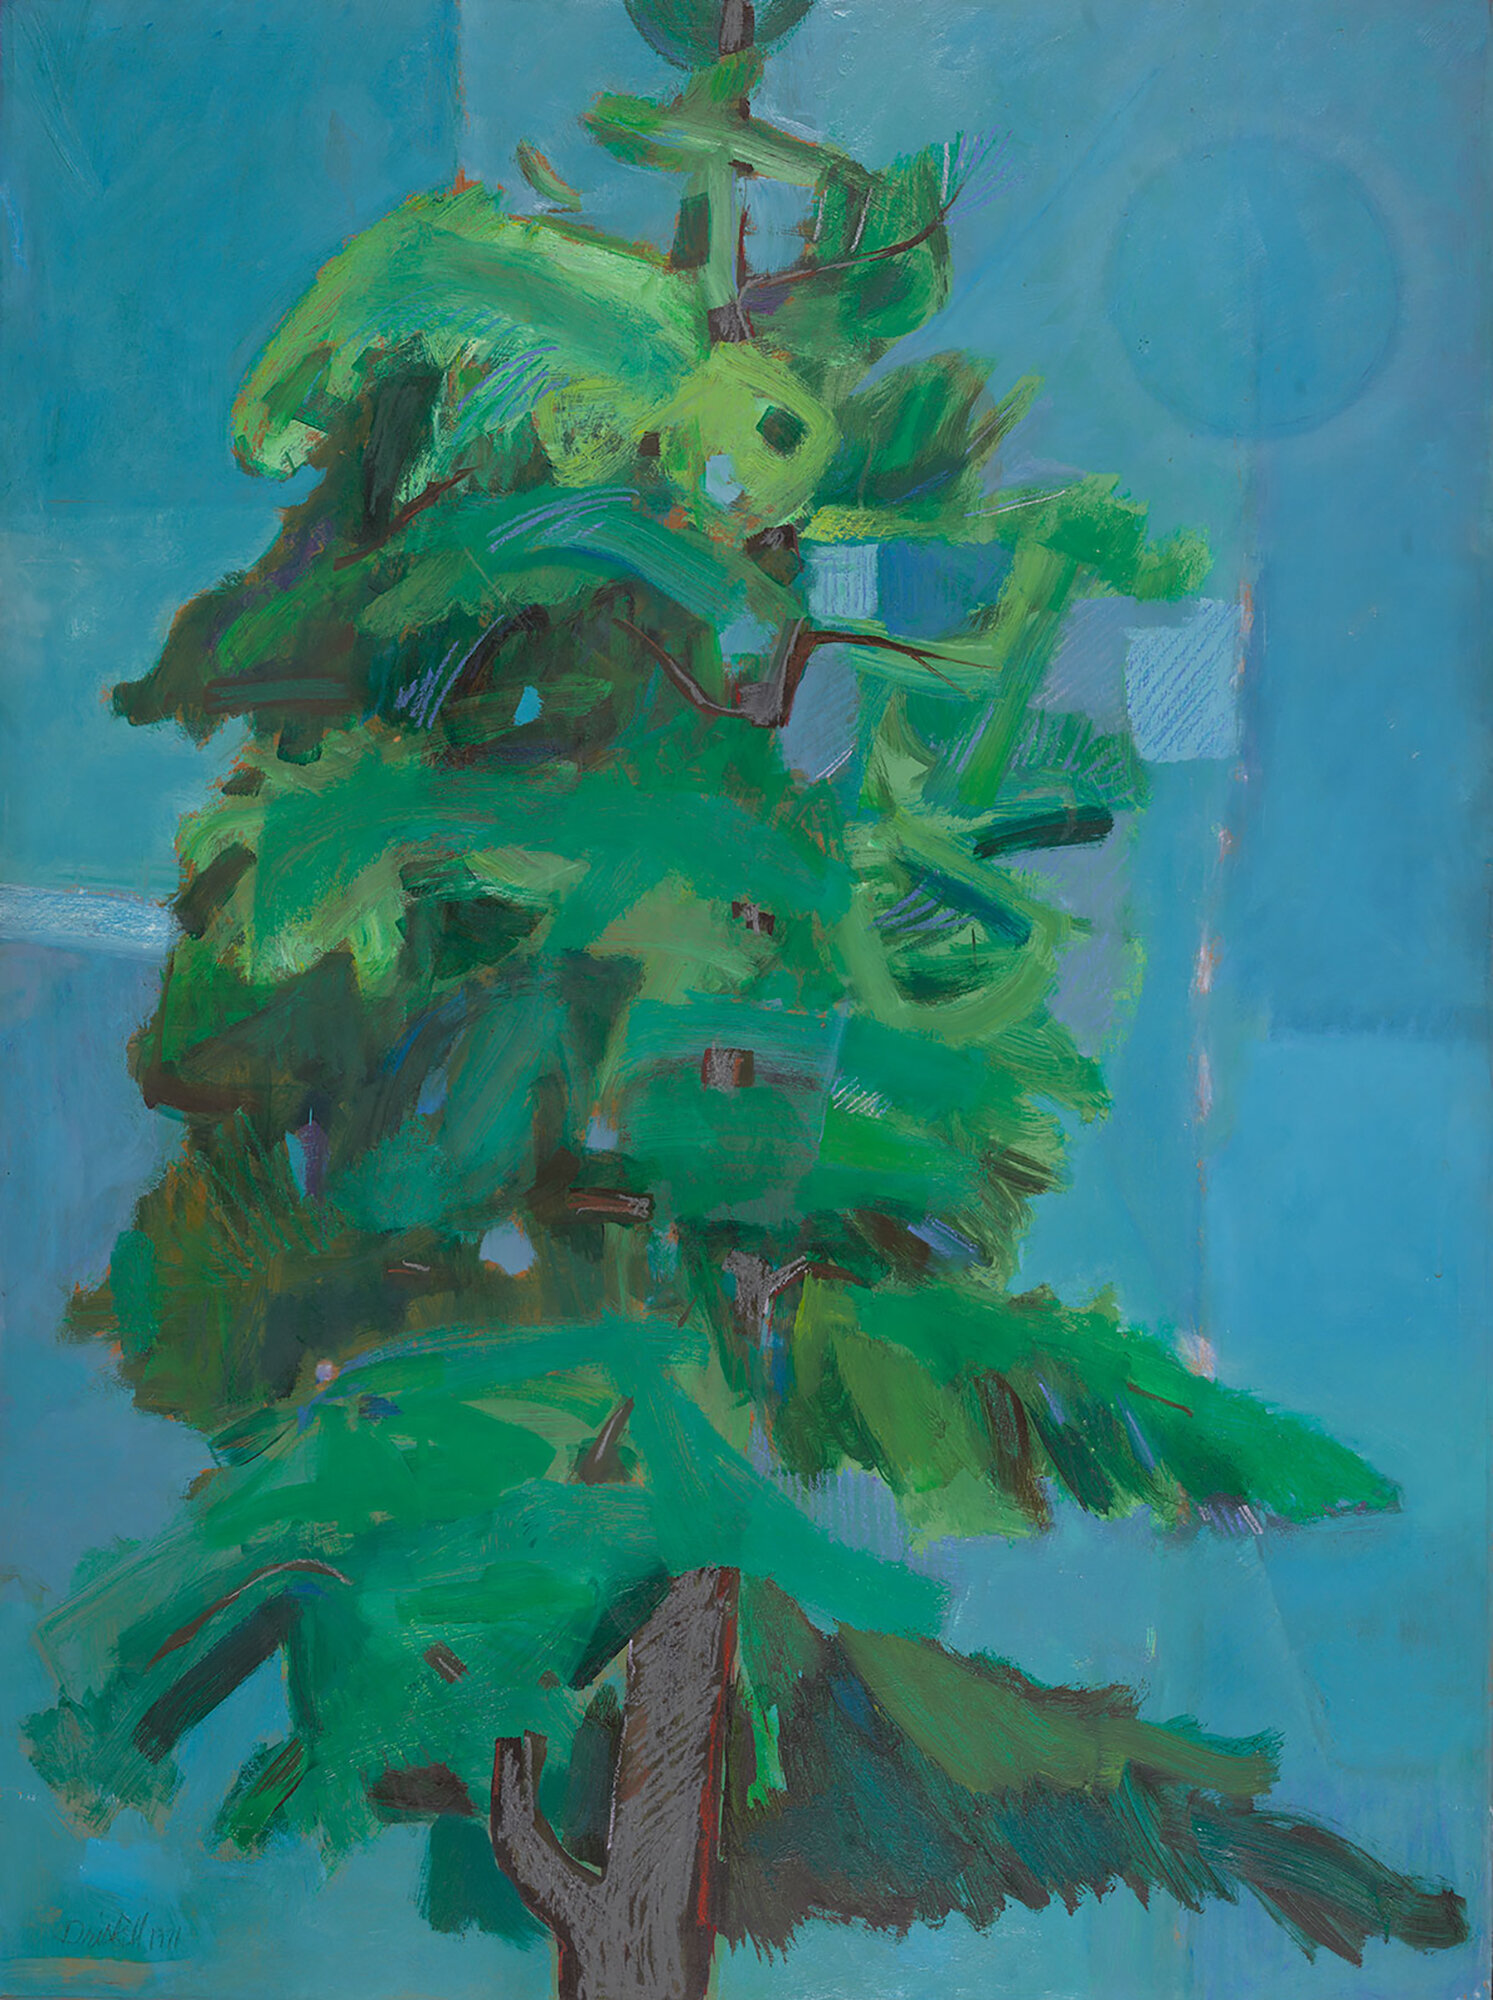  David C. Driskell (United States, 1931–2020),  Pine and Moon , 1971, oil on Masonite, 47 3/8 x 35 1/8 inches. Portland Museum of Art, Maine. Museum purchase with support from the Friends of the Collection, 2011.4. Photograph by Luc Demers. © Estate 